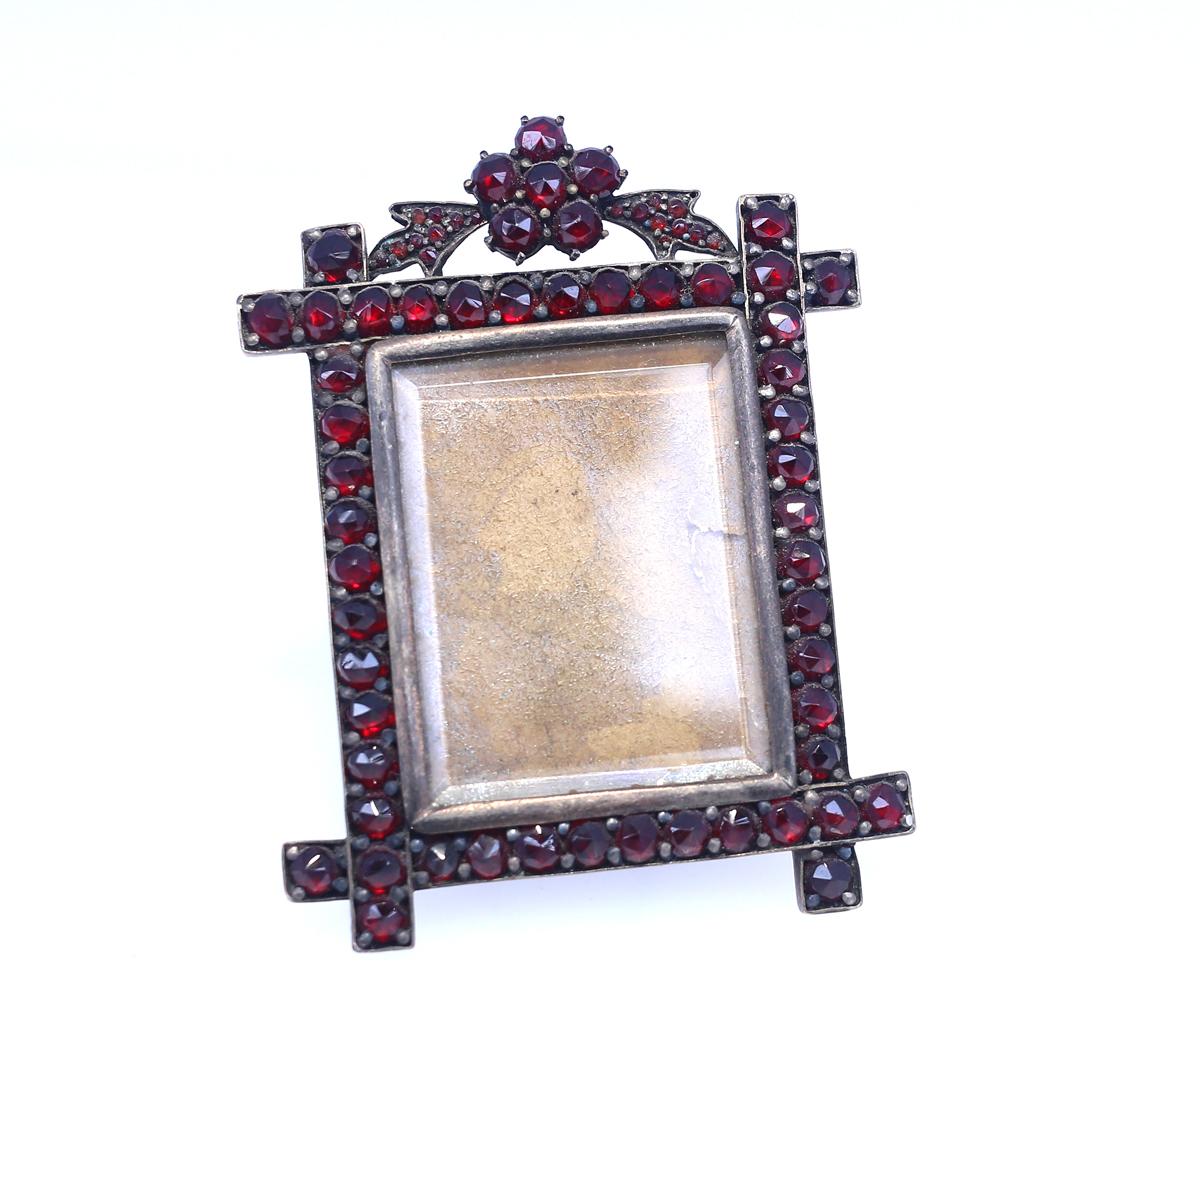 Garnet Picture Frame for the table. 
Former property of  Mary, Duchess of Roxburghe. Sold on the Sotheby’s auction in London:  Property & Precious Objects from the Estate of Mary, Duchess of Roxburghe.
The frame still holds a really fainted